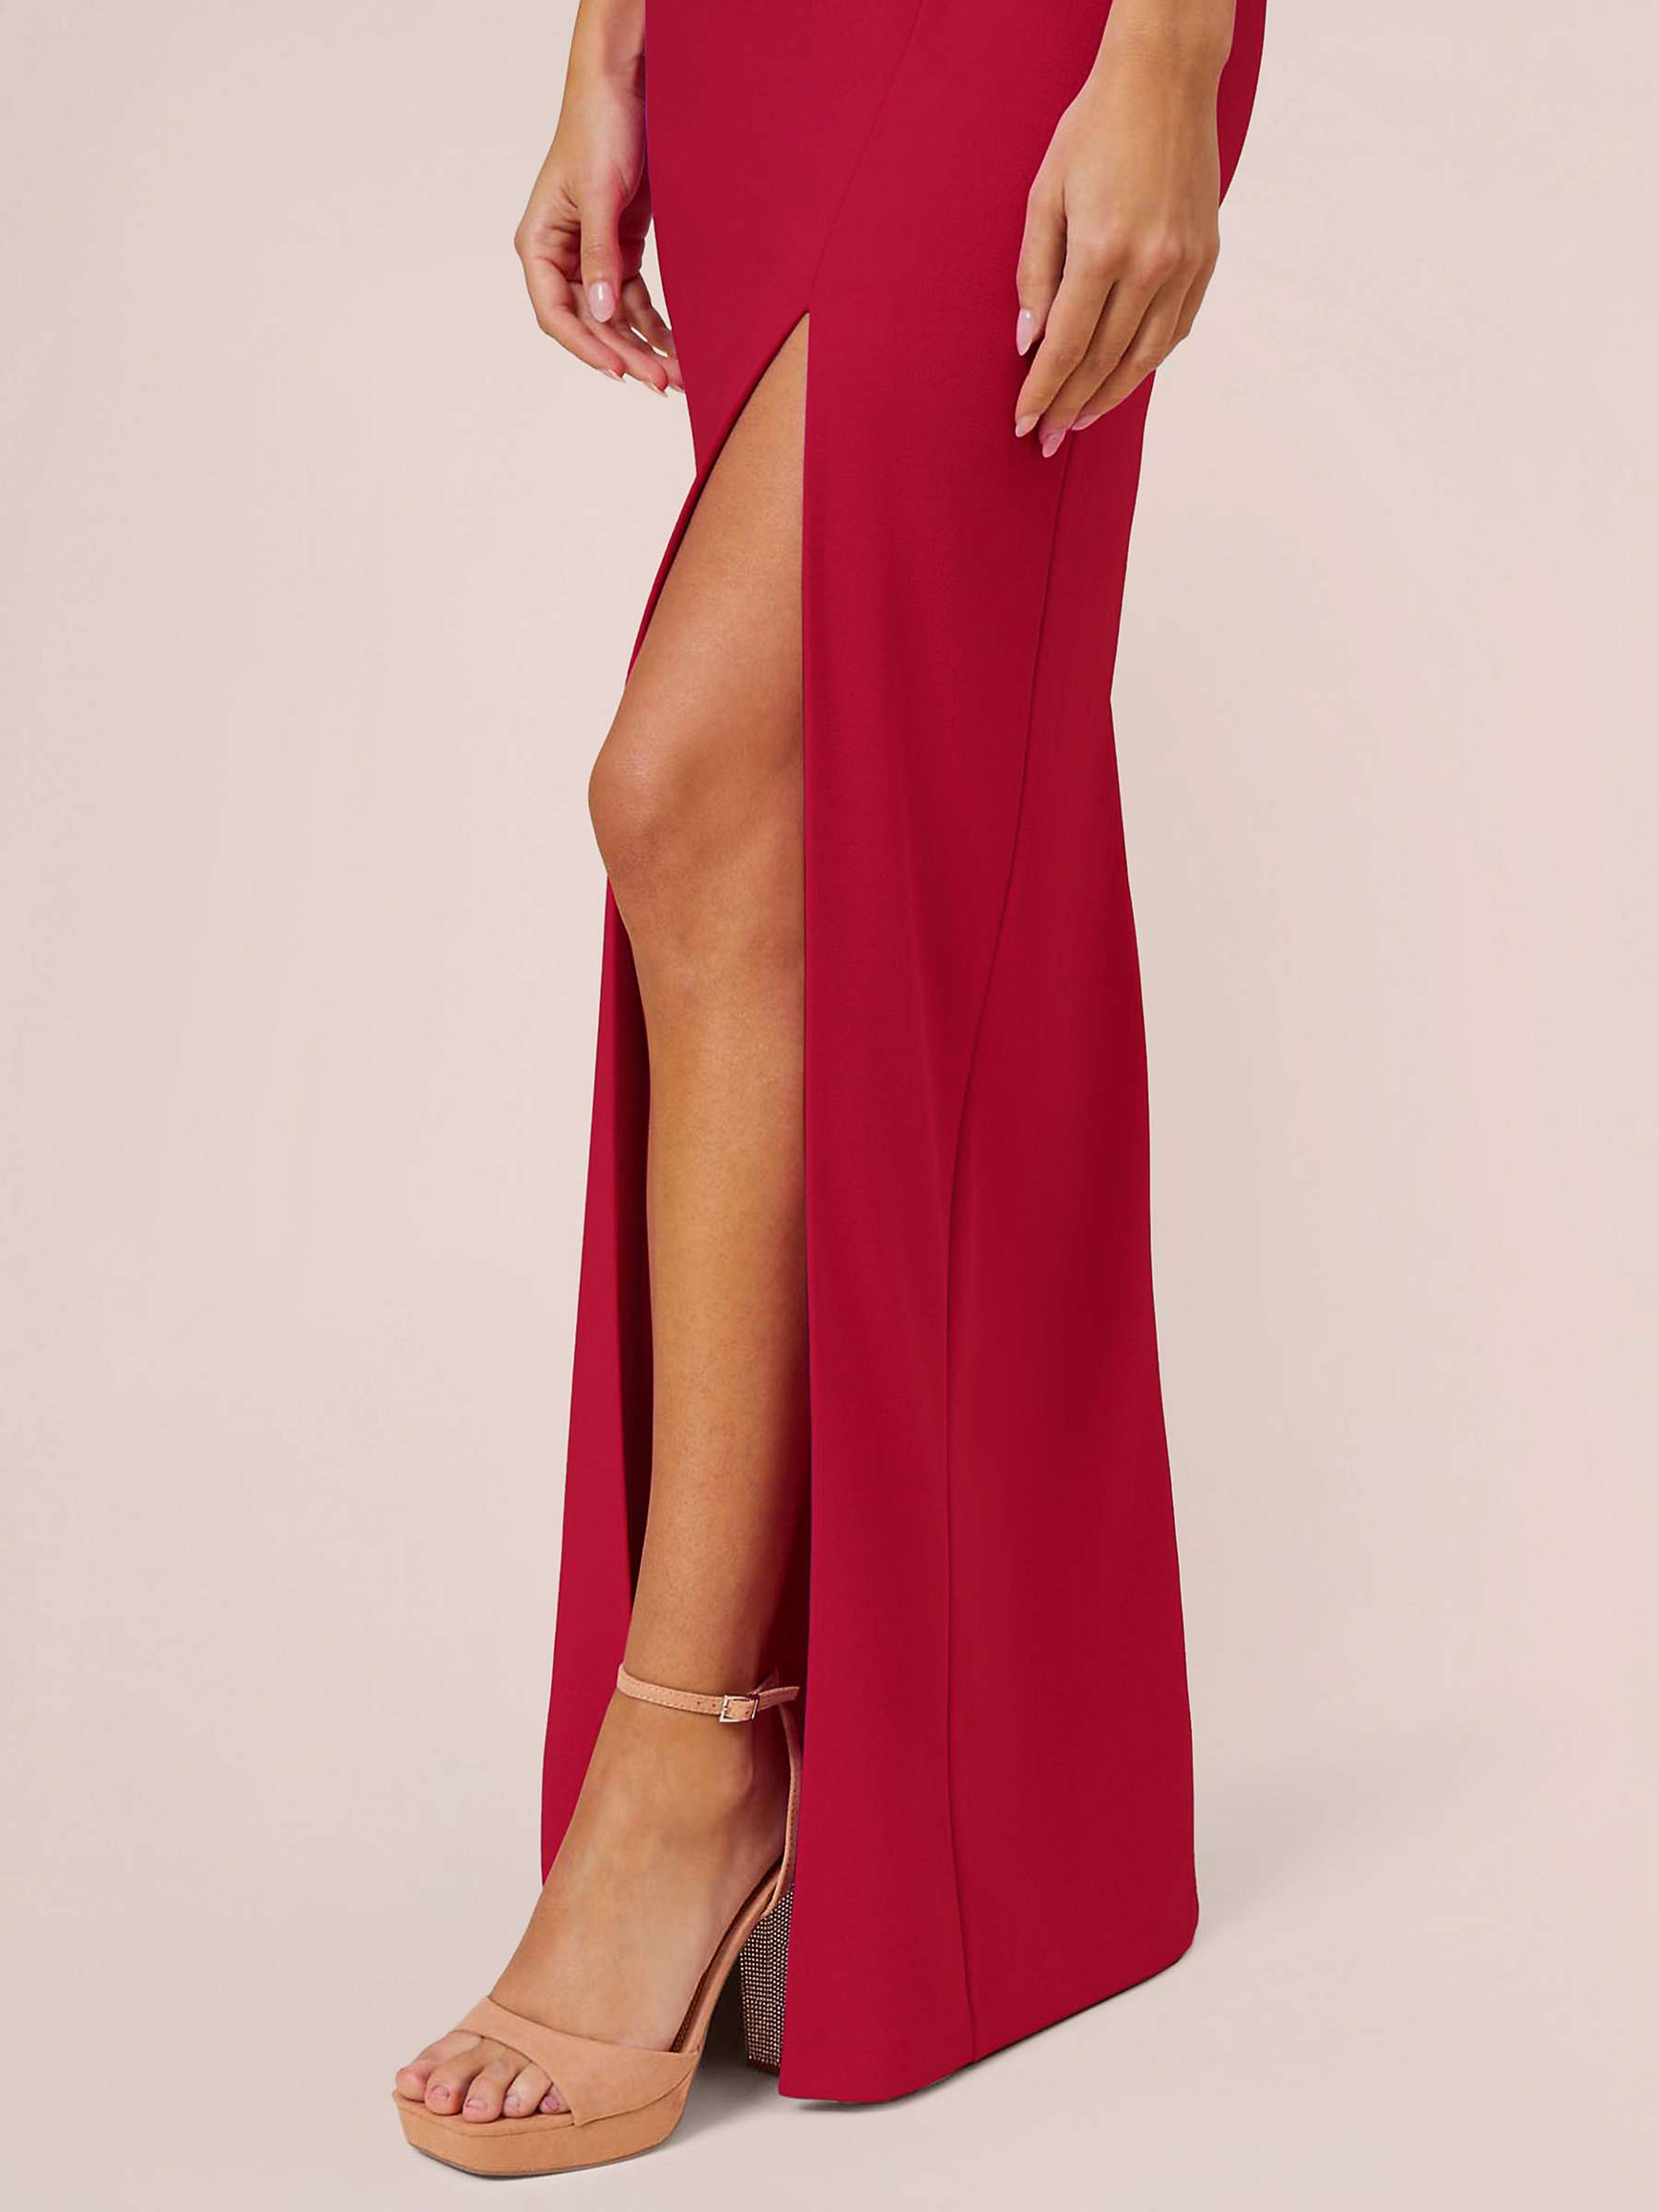 Buy Aidan by Adrianna Papell Stretch Crepe Column Maxi Dress Online at johnlewis.com